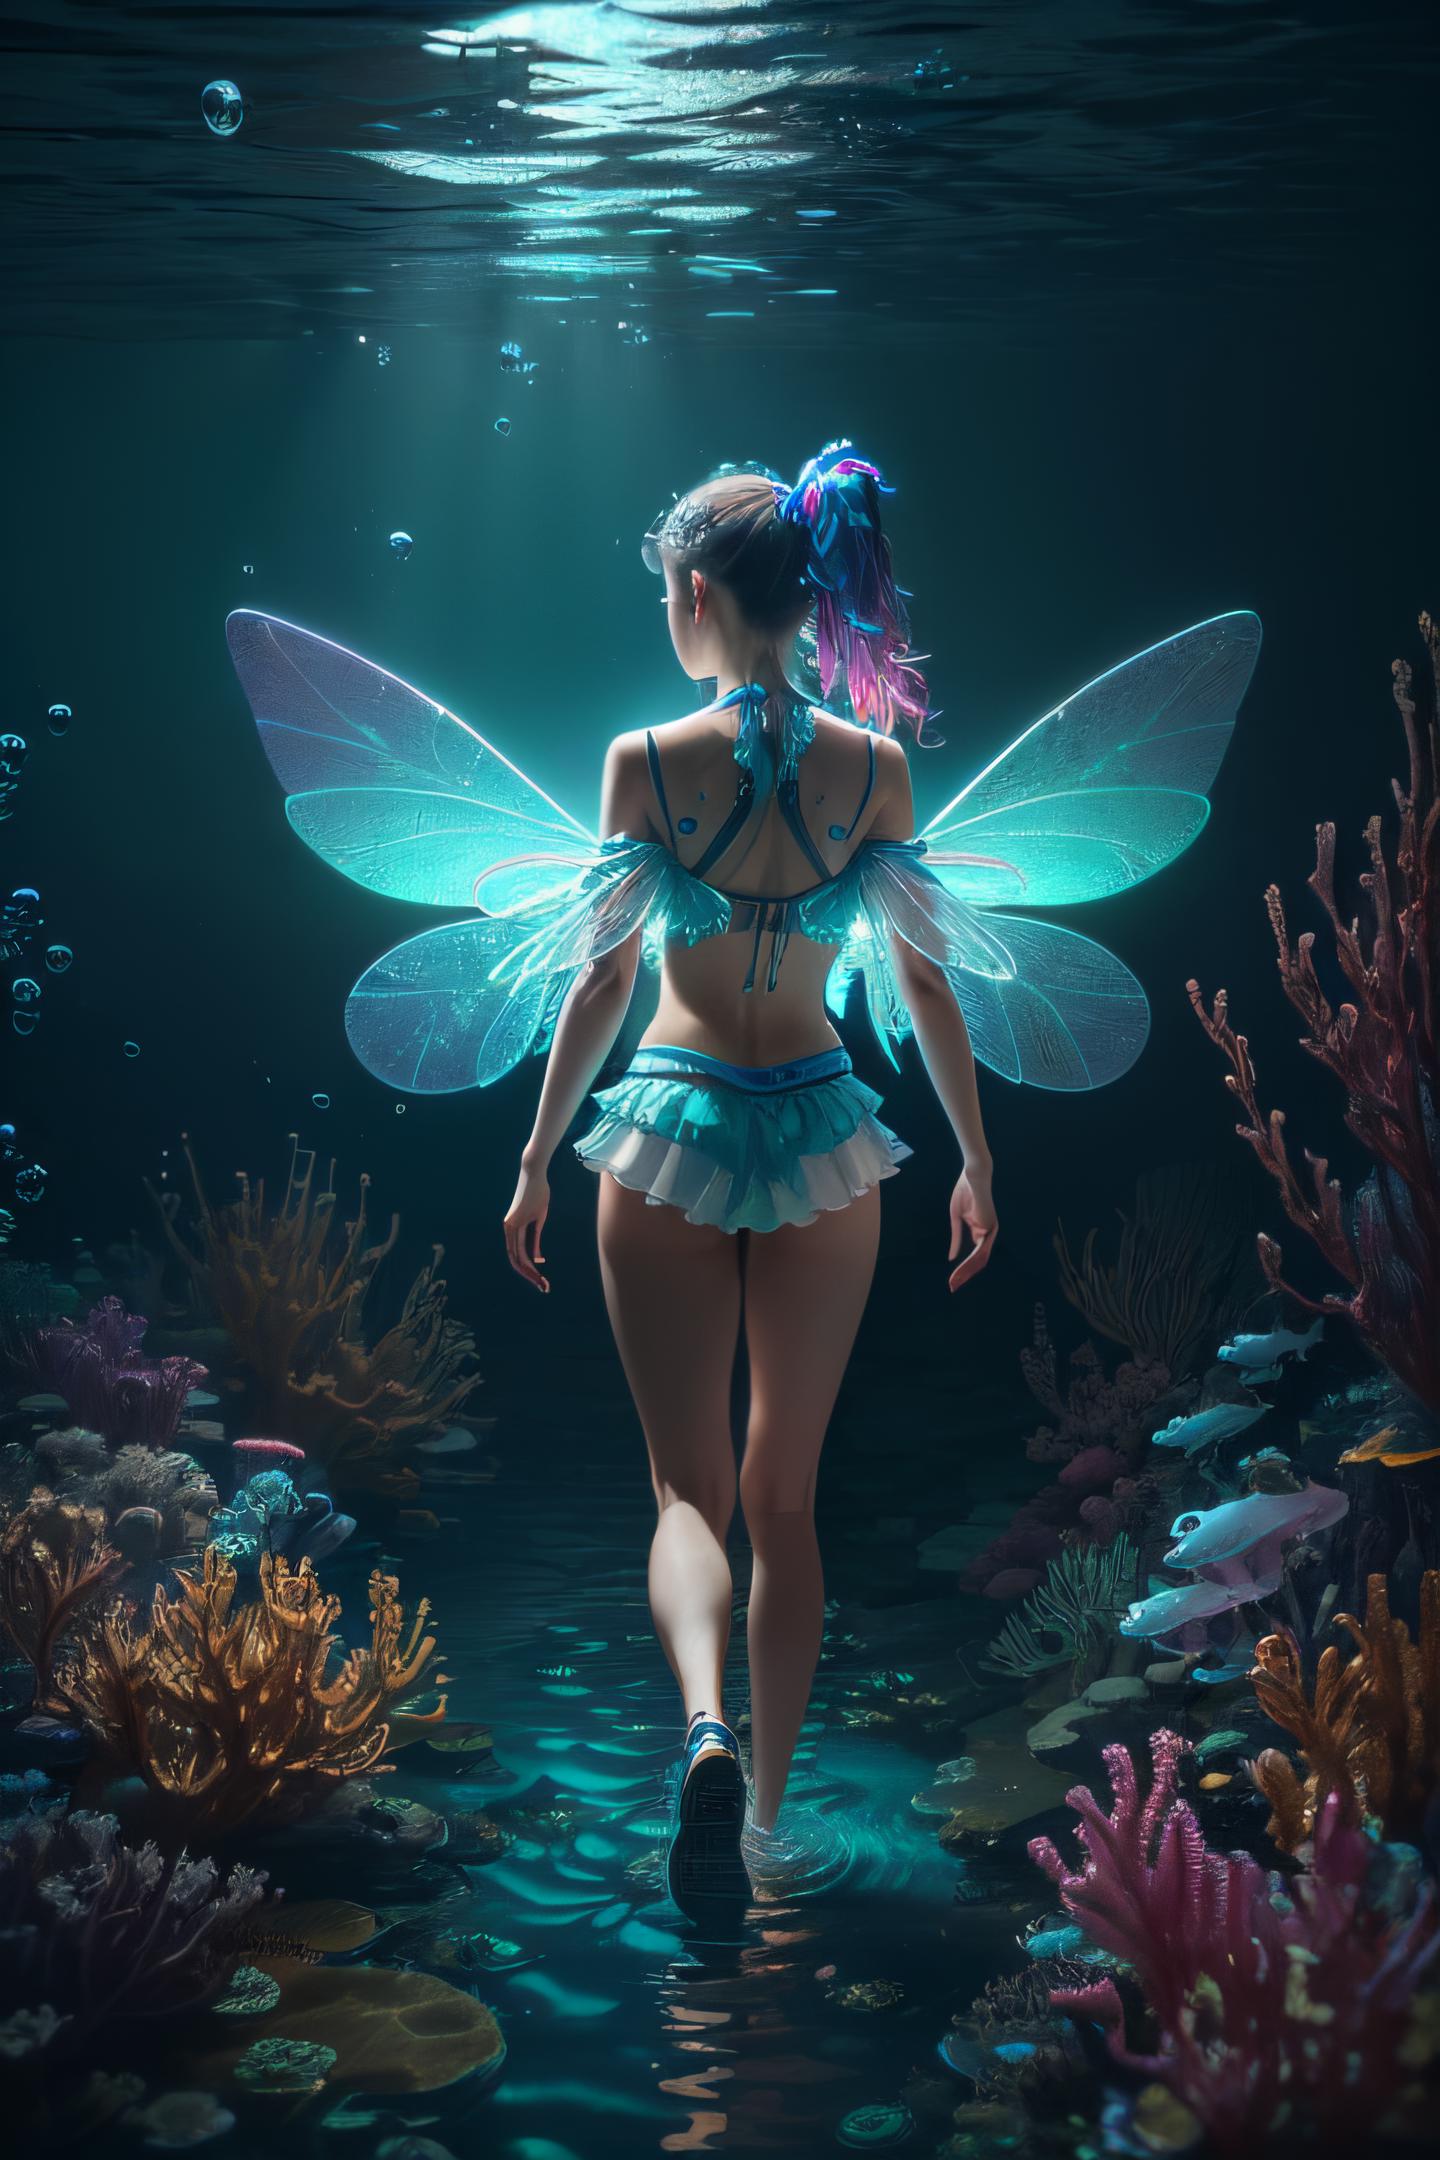 A mermaid in a blue swimsuit walking through an underwater cave.